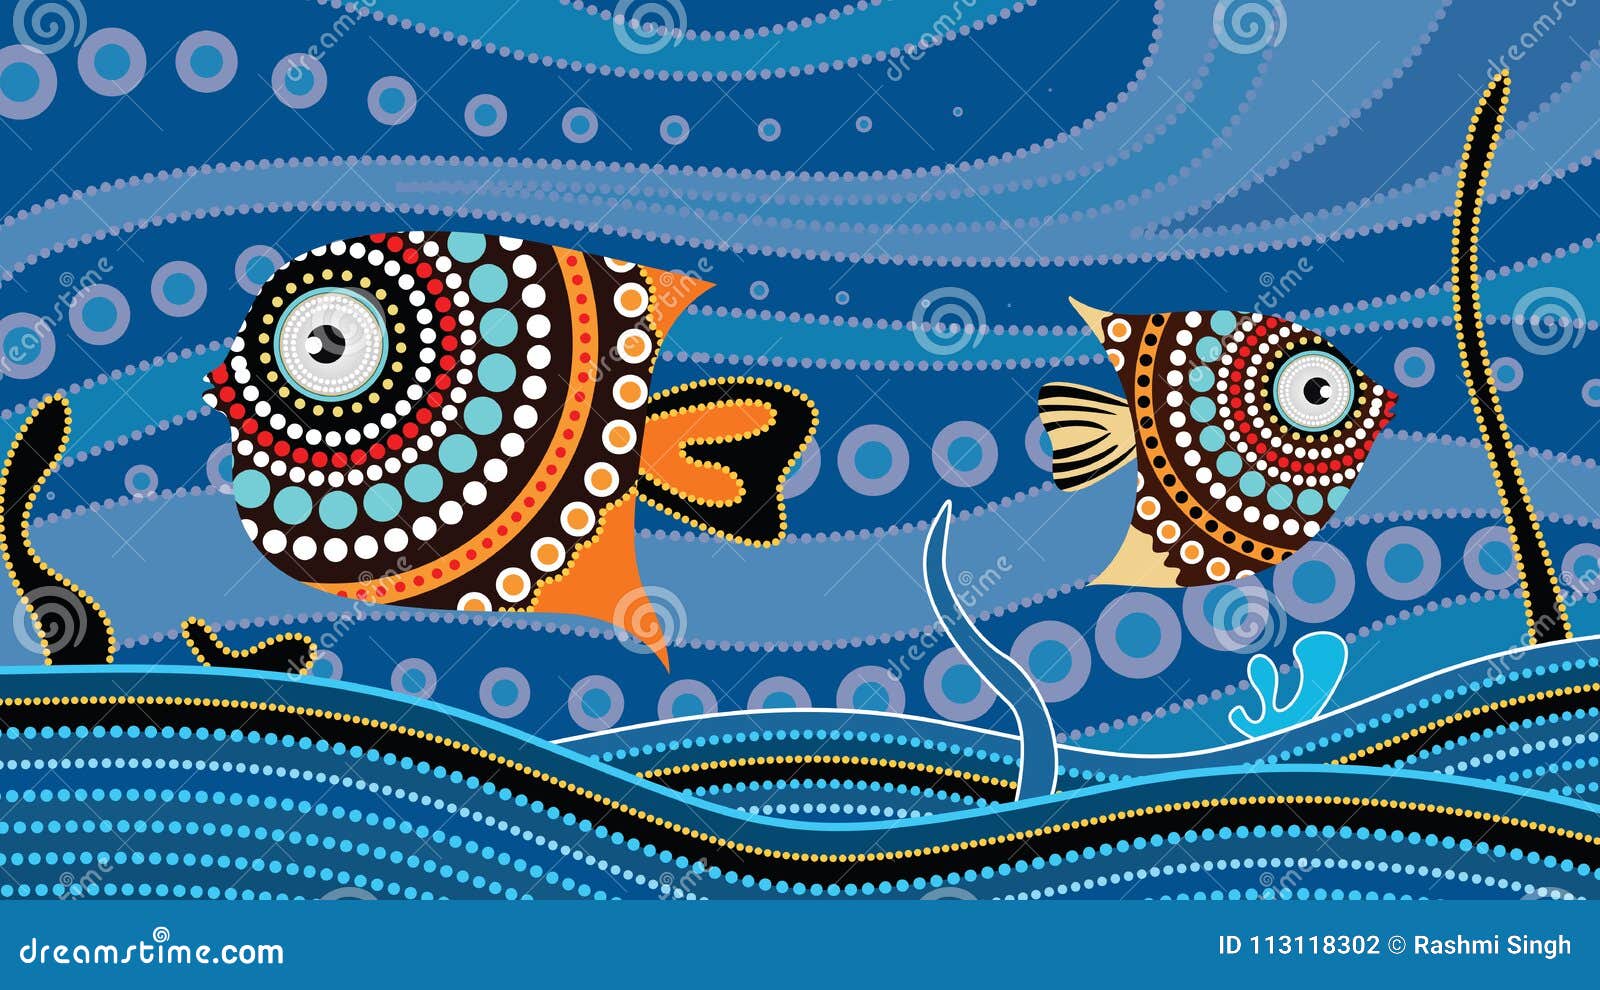 Aboriginal Dot Art Painting with Fish. Underwater Concept, Landscape  Background Wallpaper Vector Stock Vector - Illustration of drawn, food:  113118302